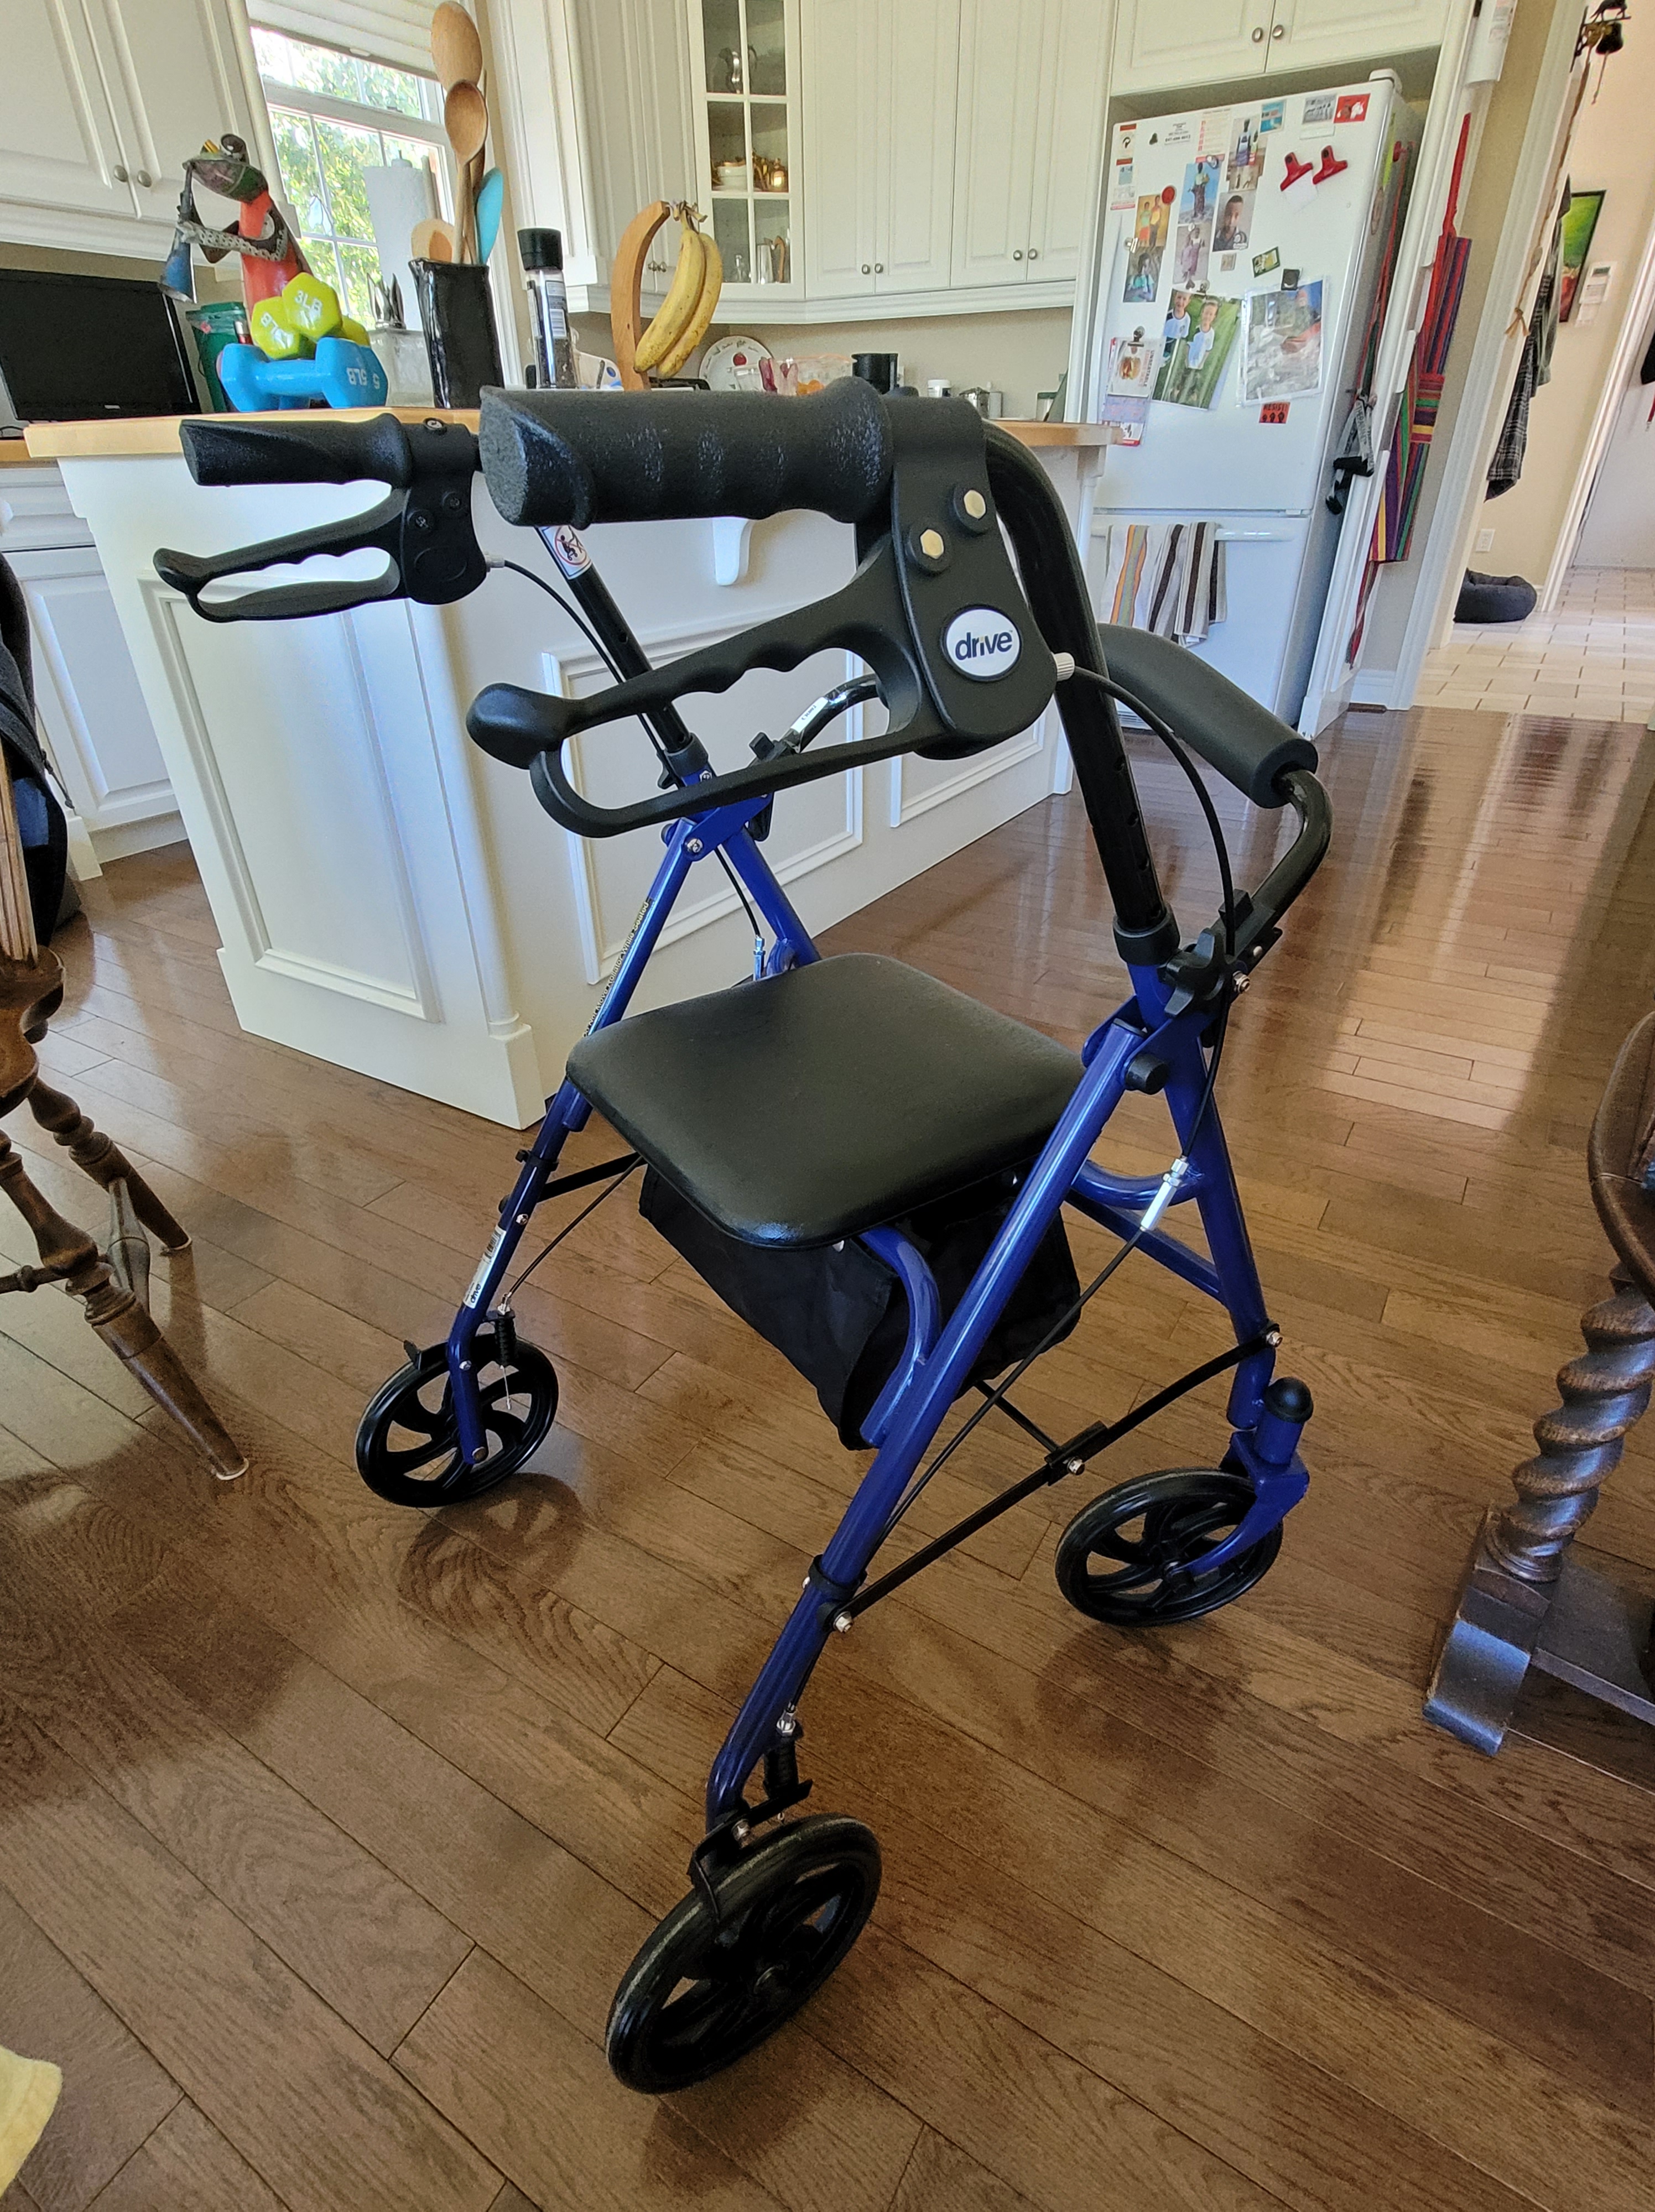 Introducing…Ronnie Rollator!